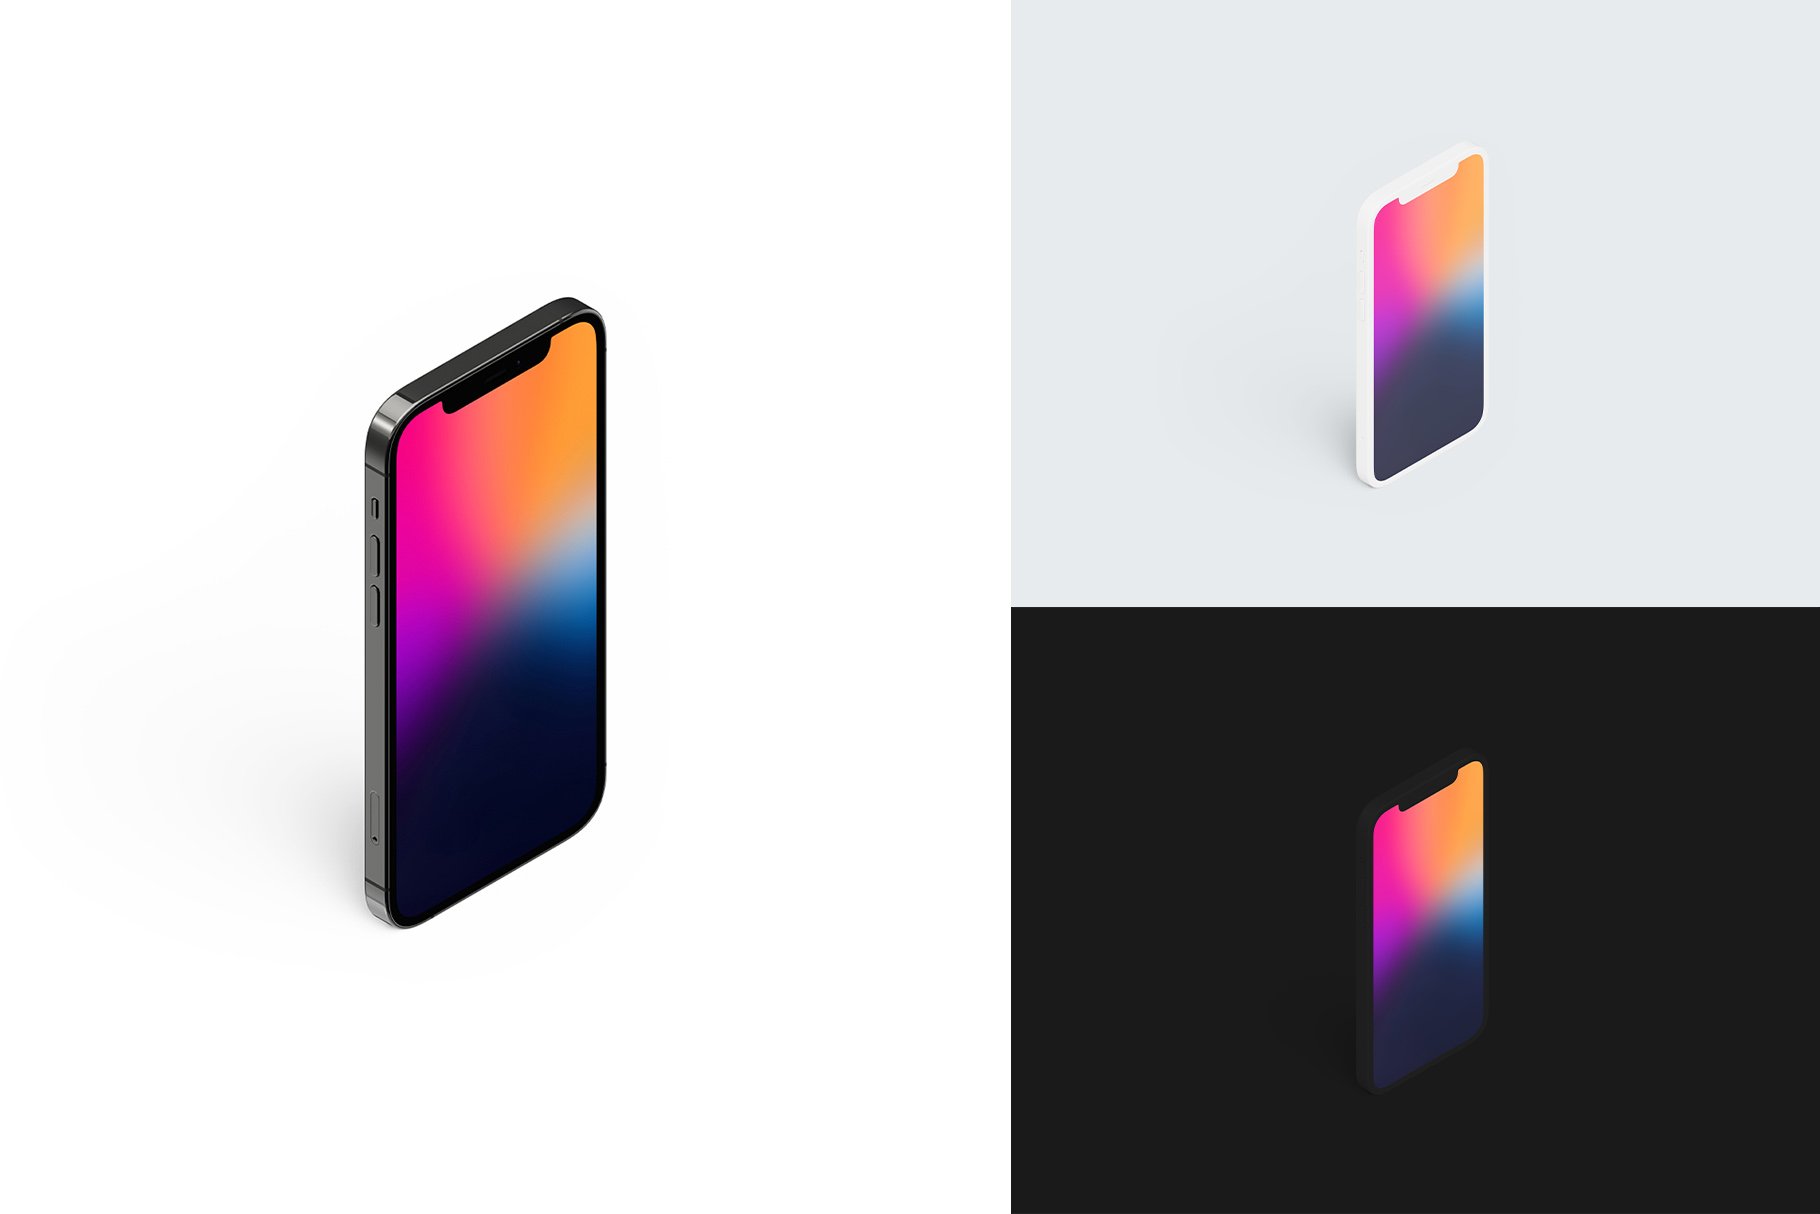 iphone 12 pro mockup pack by anthony boyd graphics 2812c29 834